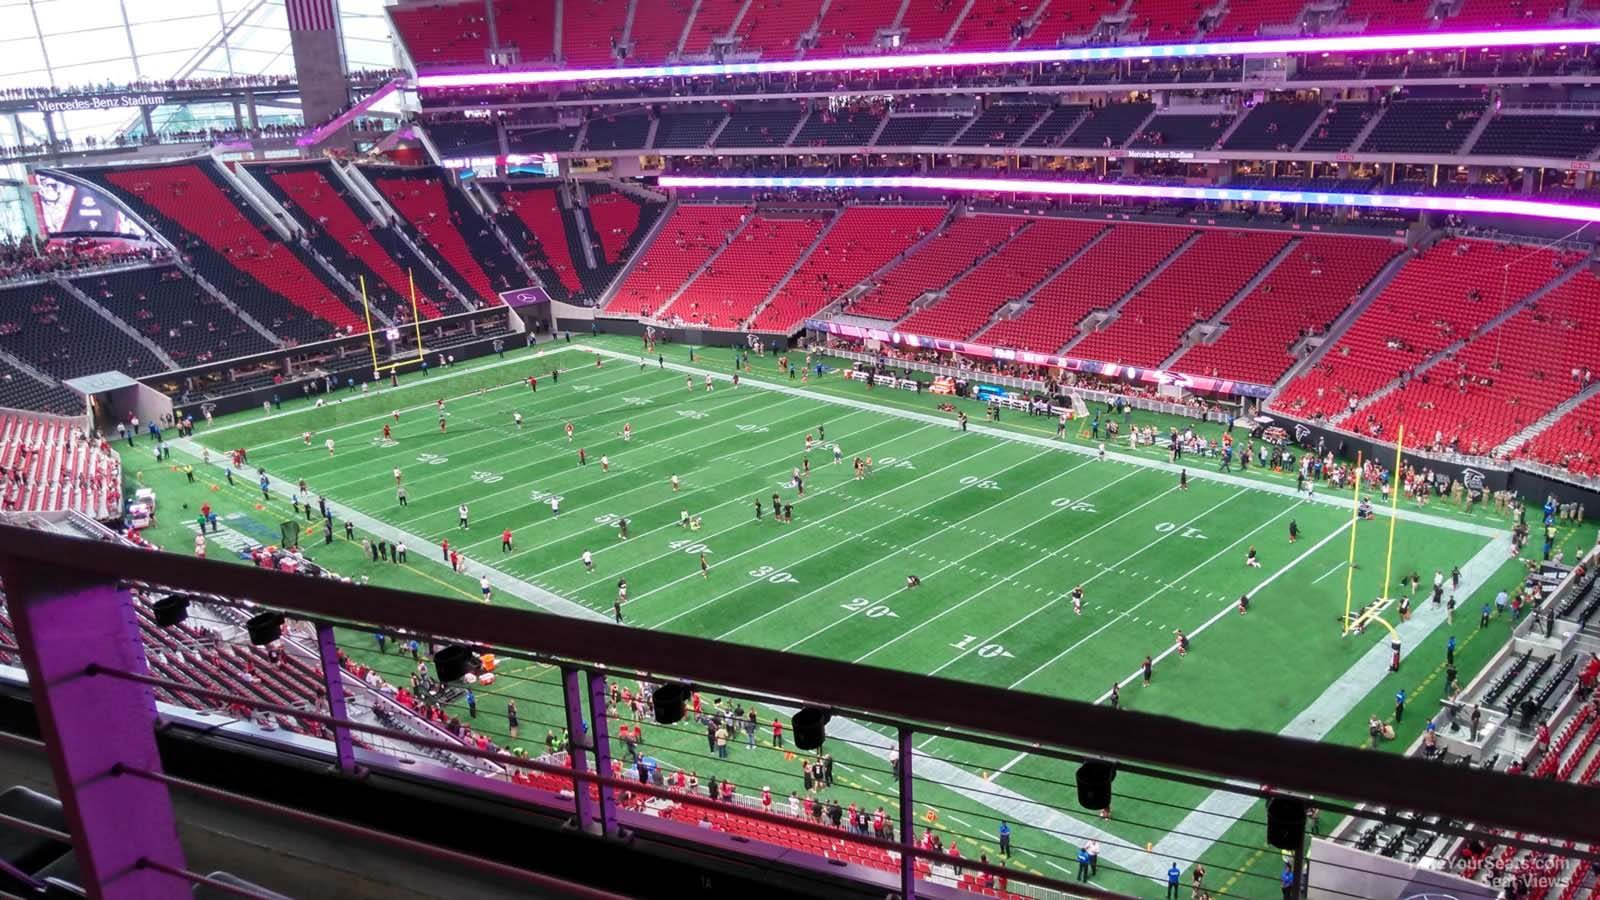 section 333, row 4 seat view  for football - mercedes-benz stadium